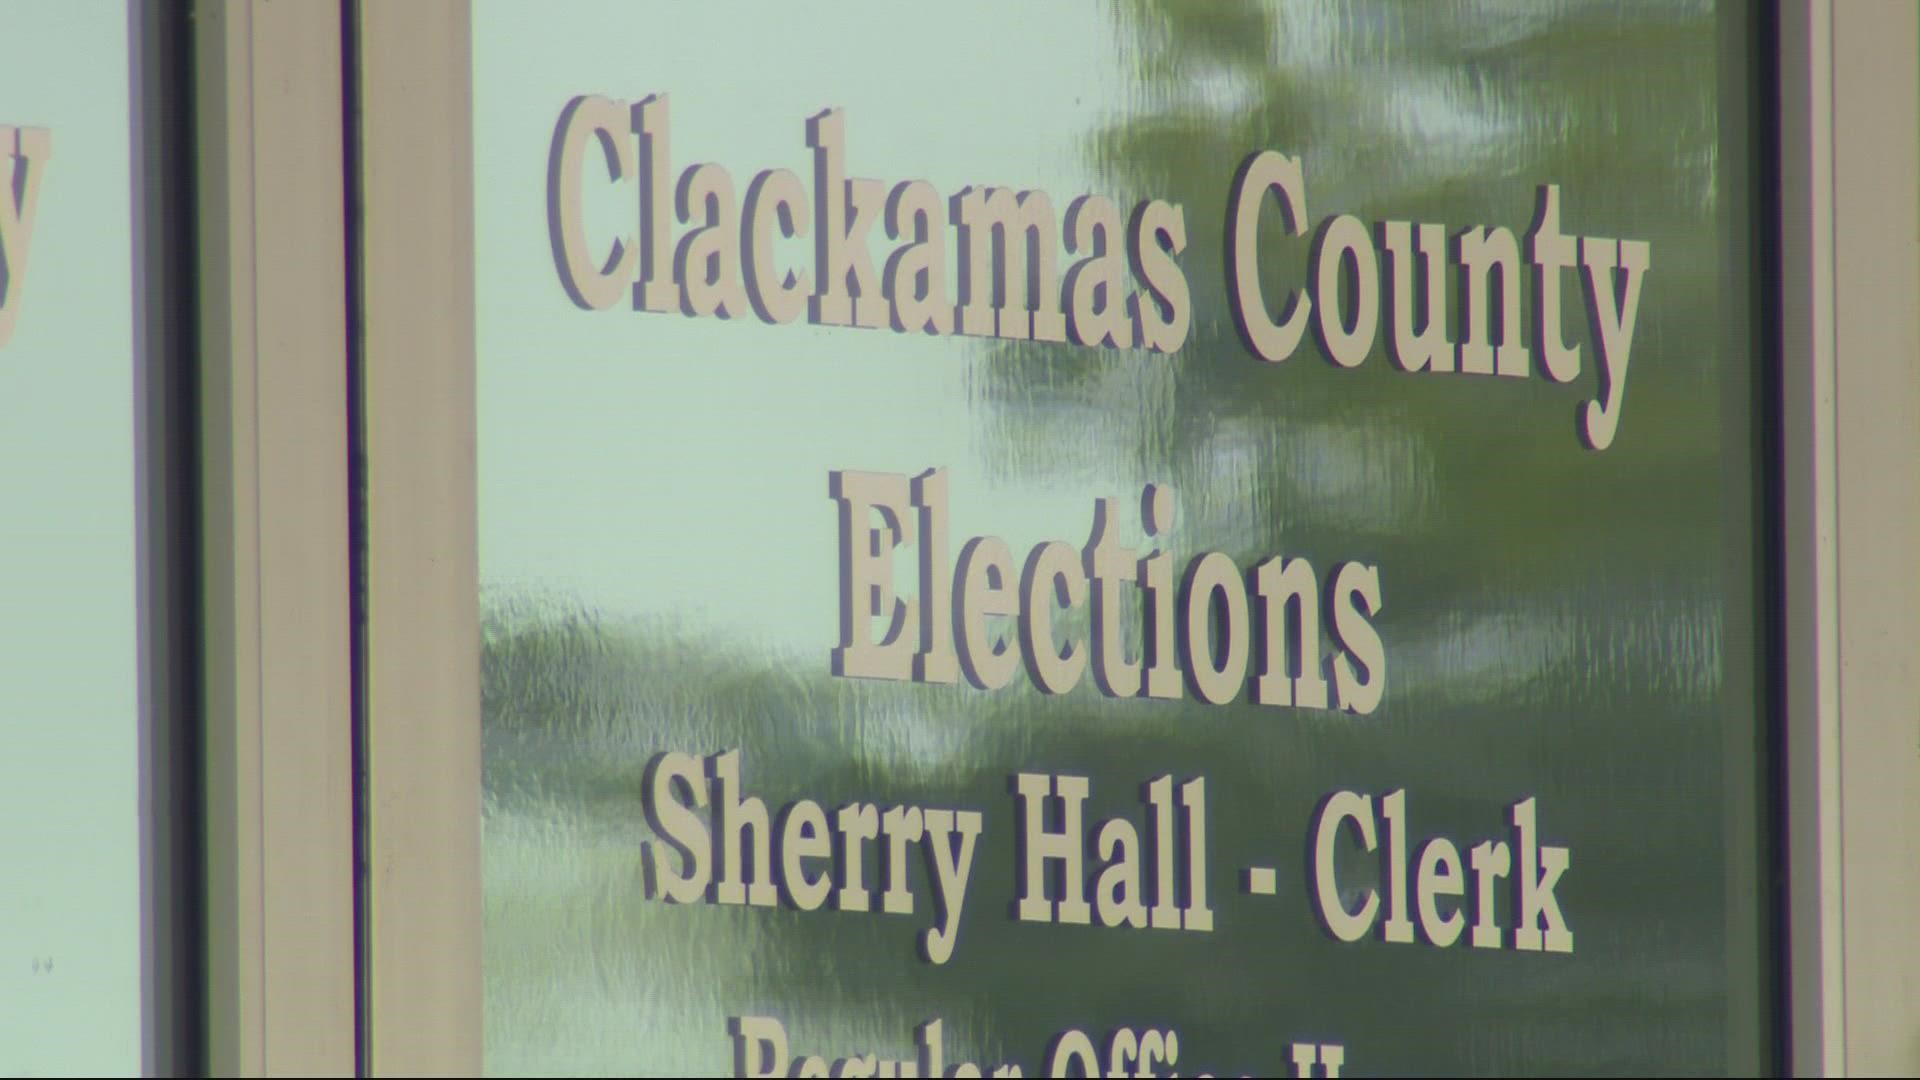 County elections workers were hardly able to make a dent in the marred ballots last night, but Clerk Sherry Hall says they are now prepared to move more quickly.